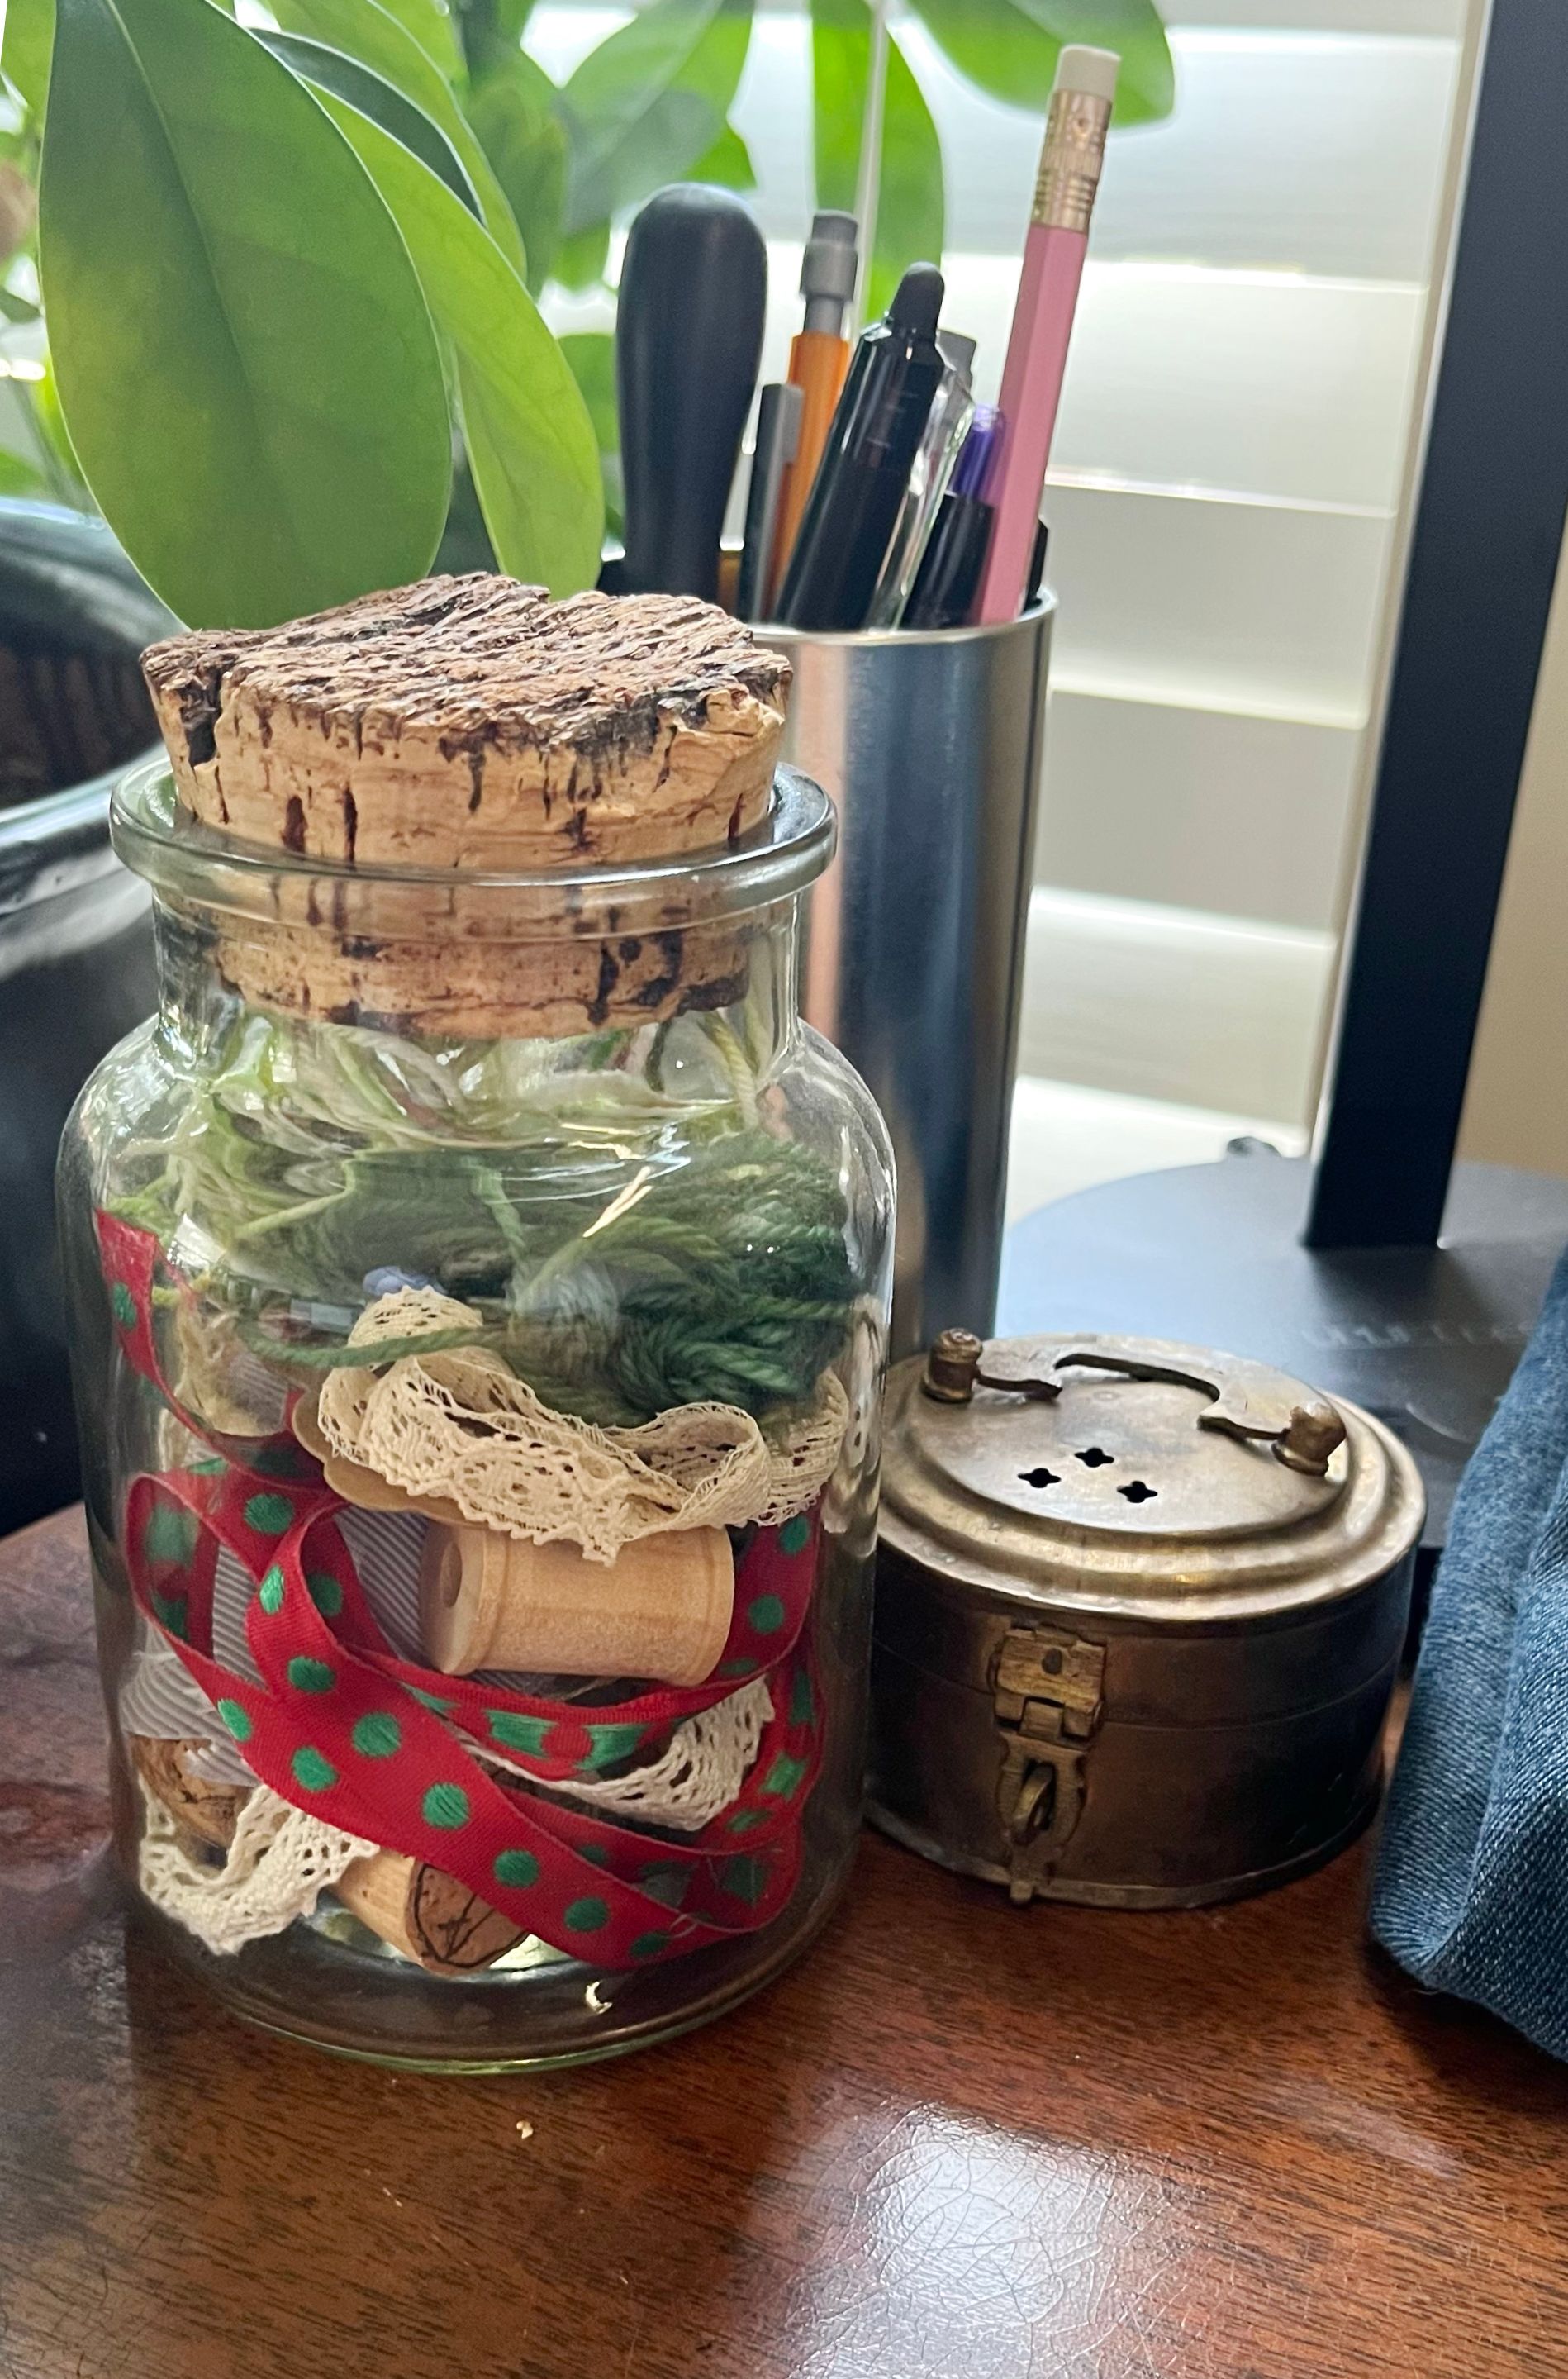 My notions jar, writing instruments, and a possible pin cushion project.